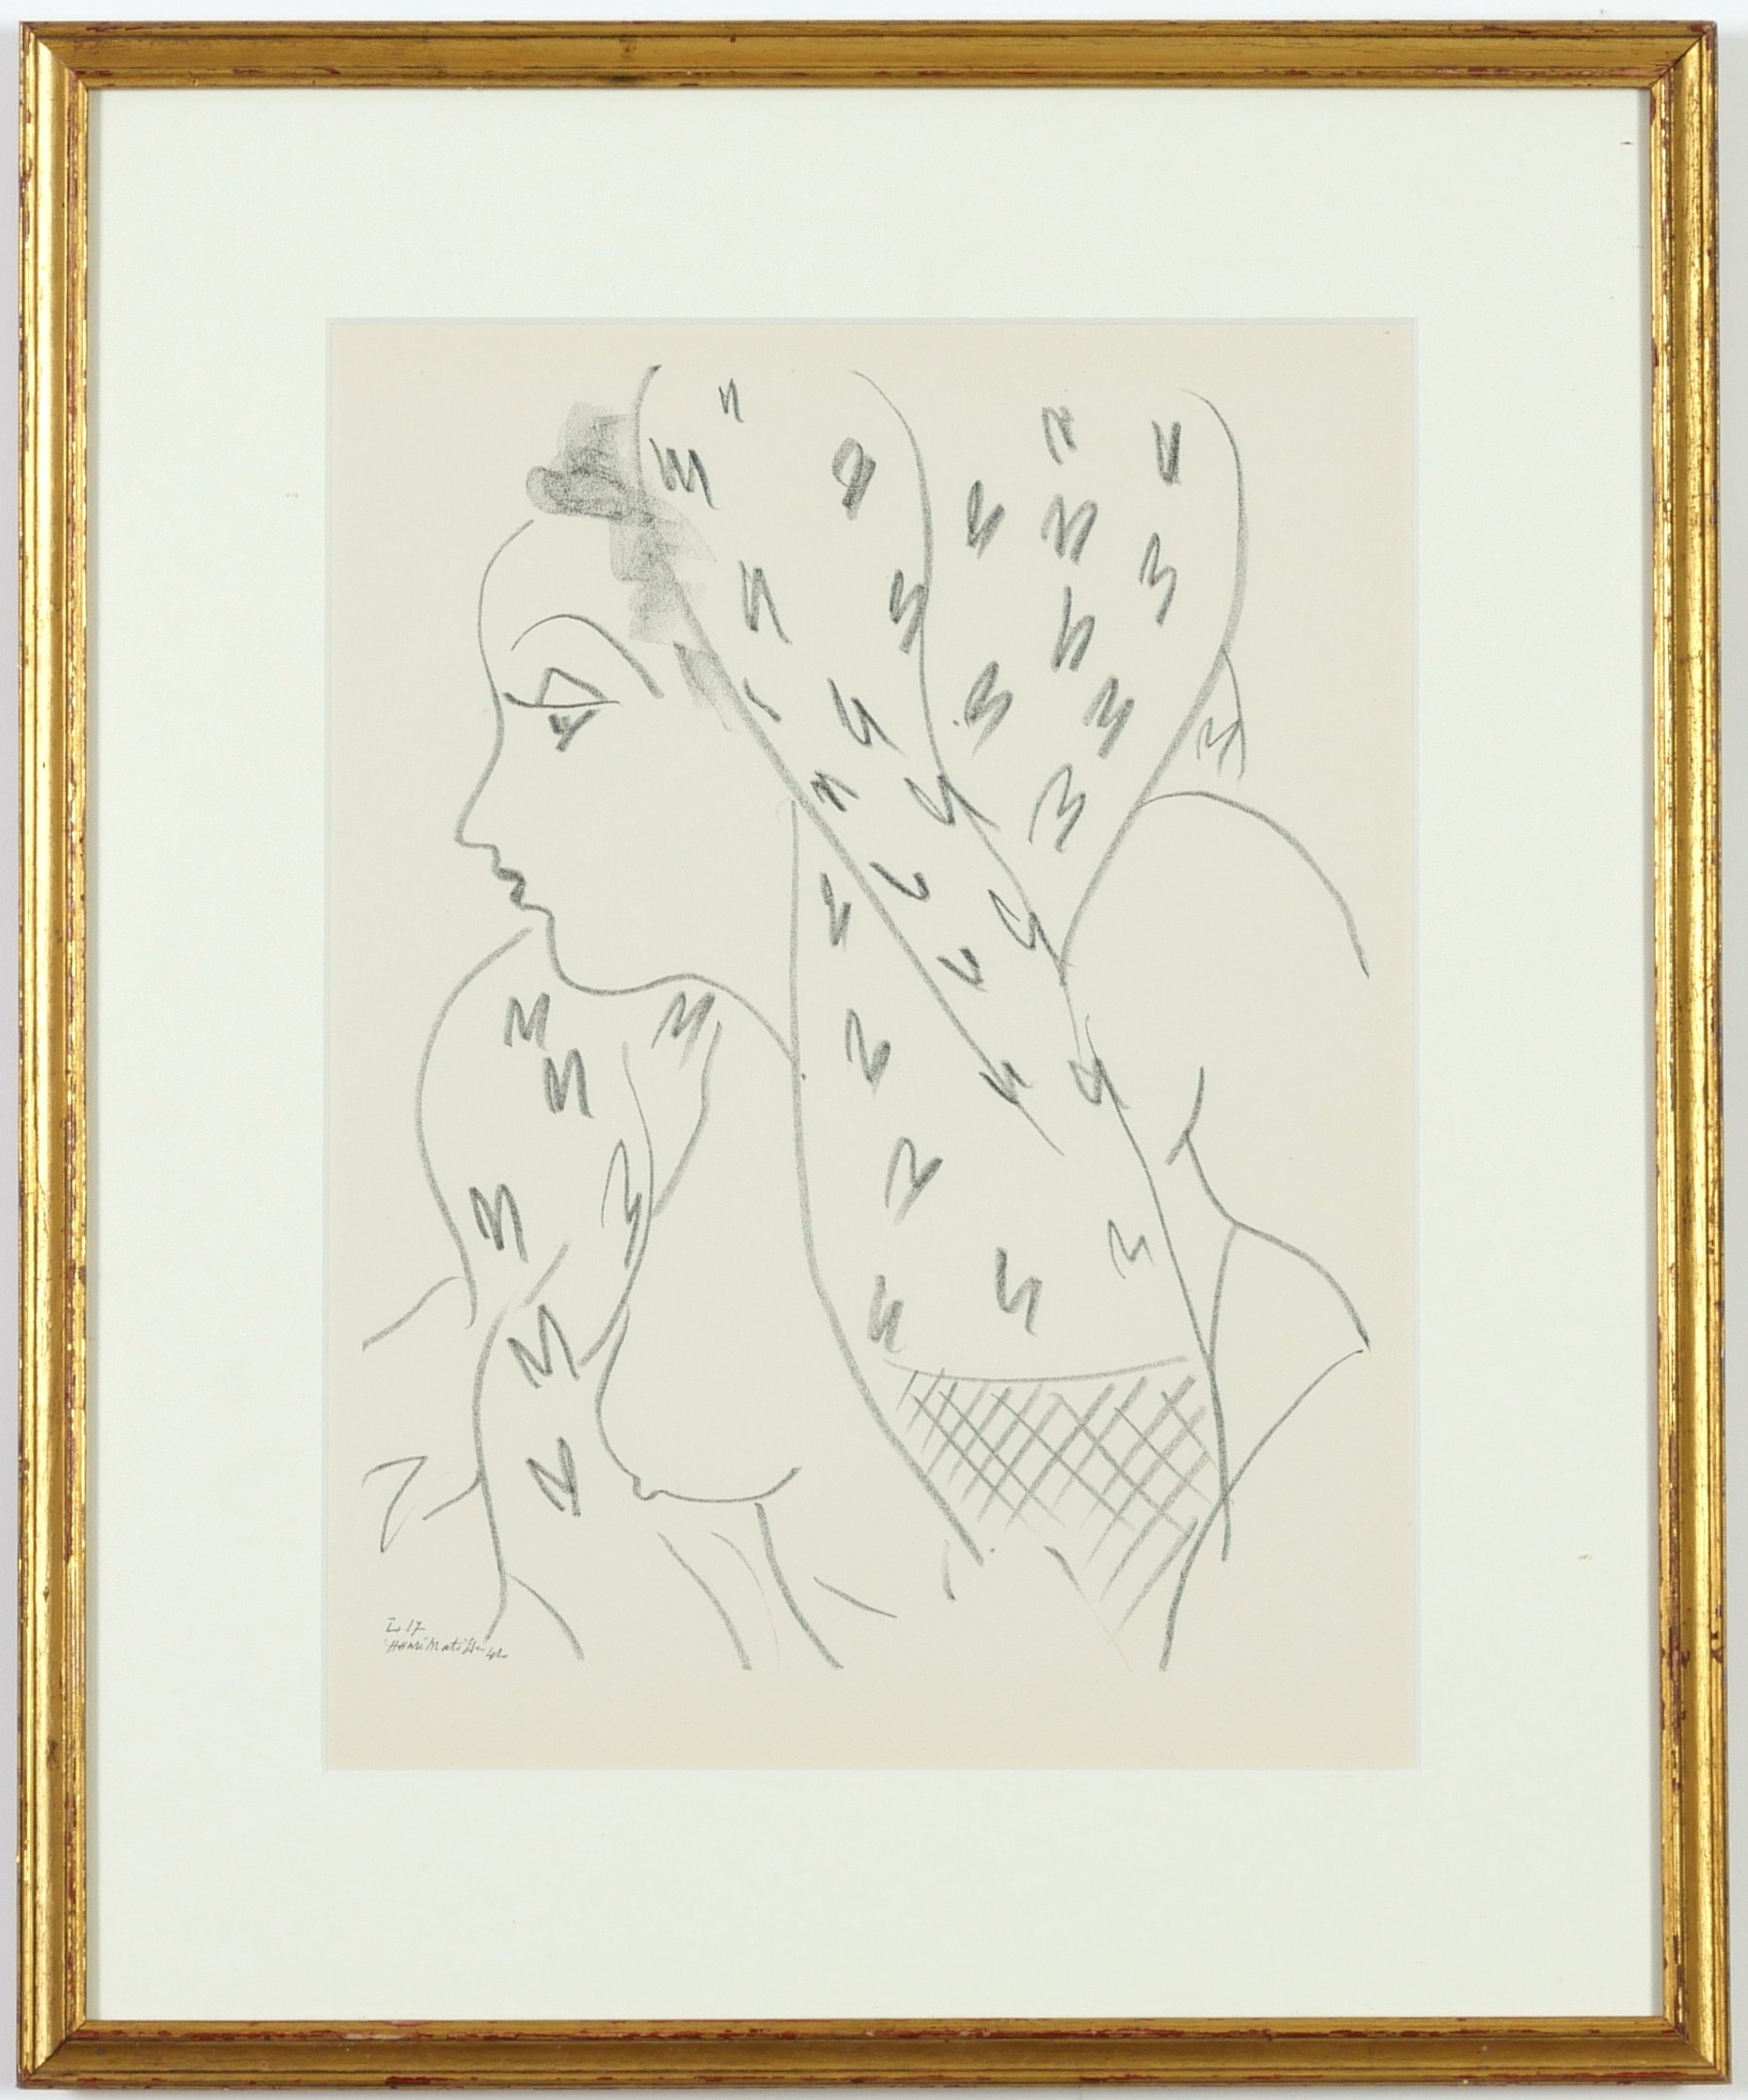 Seated Woman by Henri Matisse, printed 1943